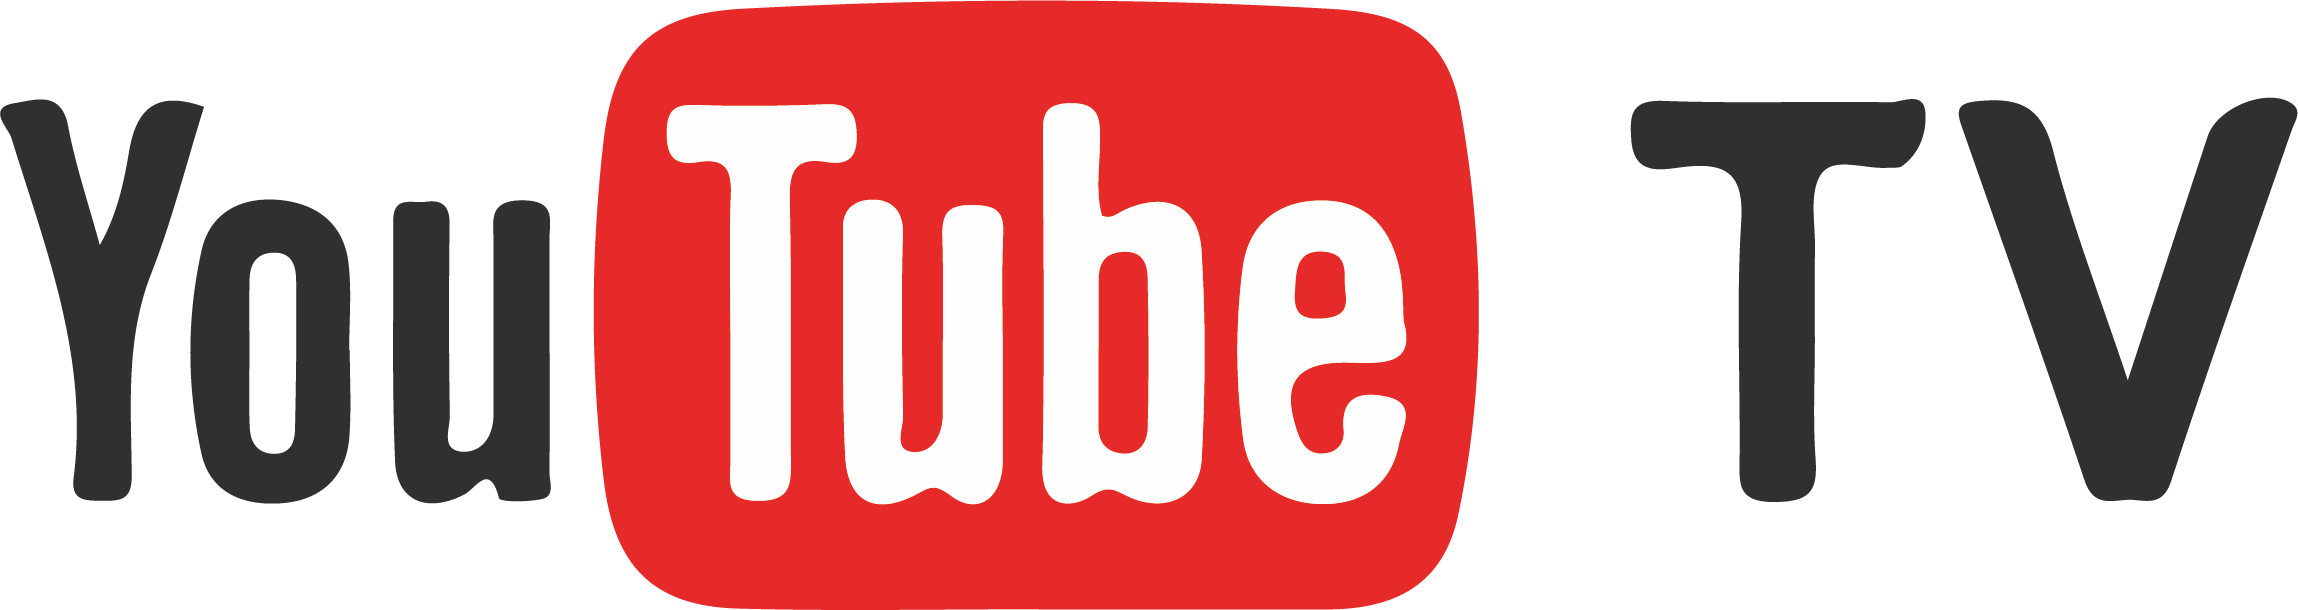 YouTube TV Channel Logo - YouTube TV Channels [Lineup and Packages]